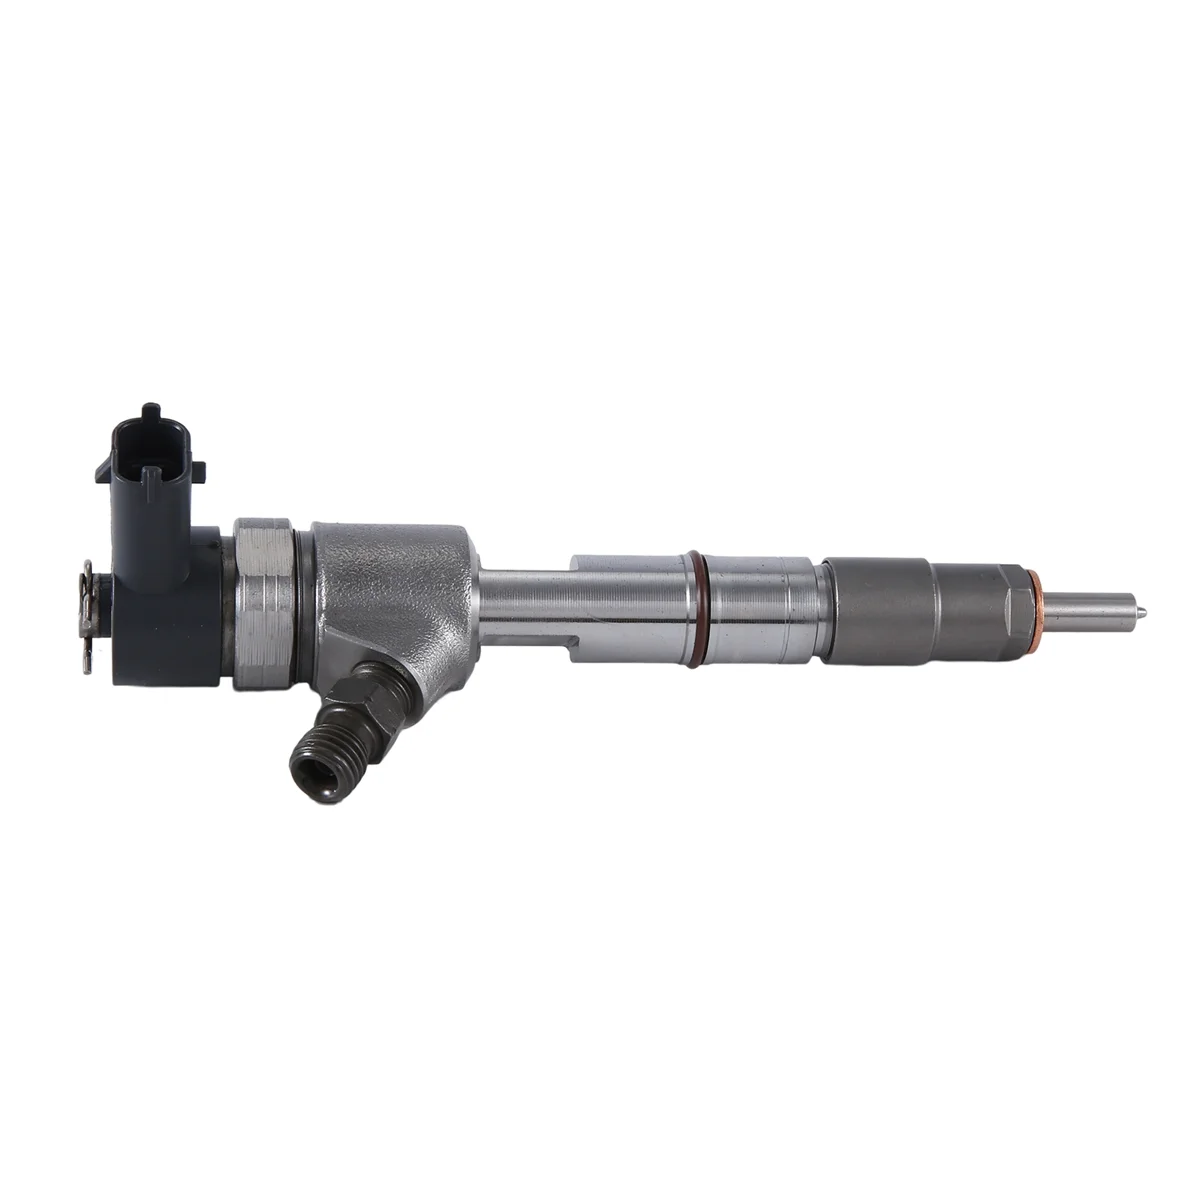 

0445110629 New Common Rail Diesel Fuel Injector Nozzle for JMC